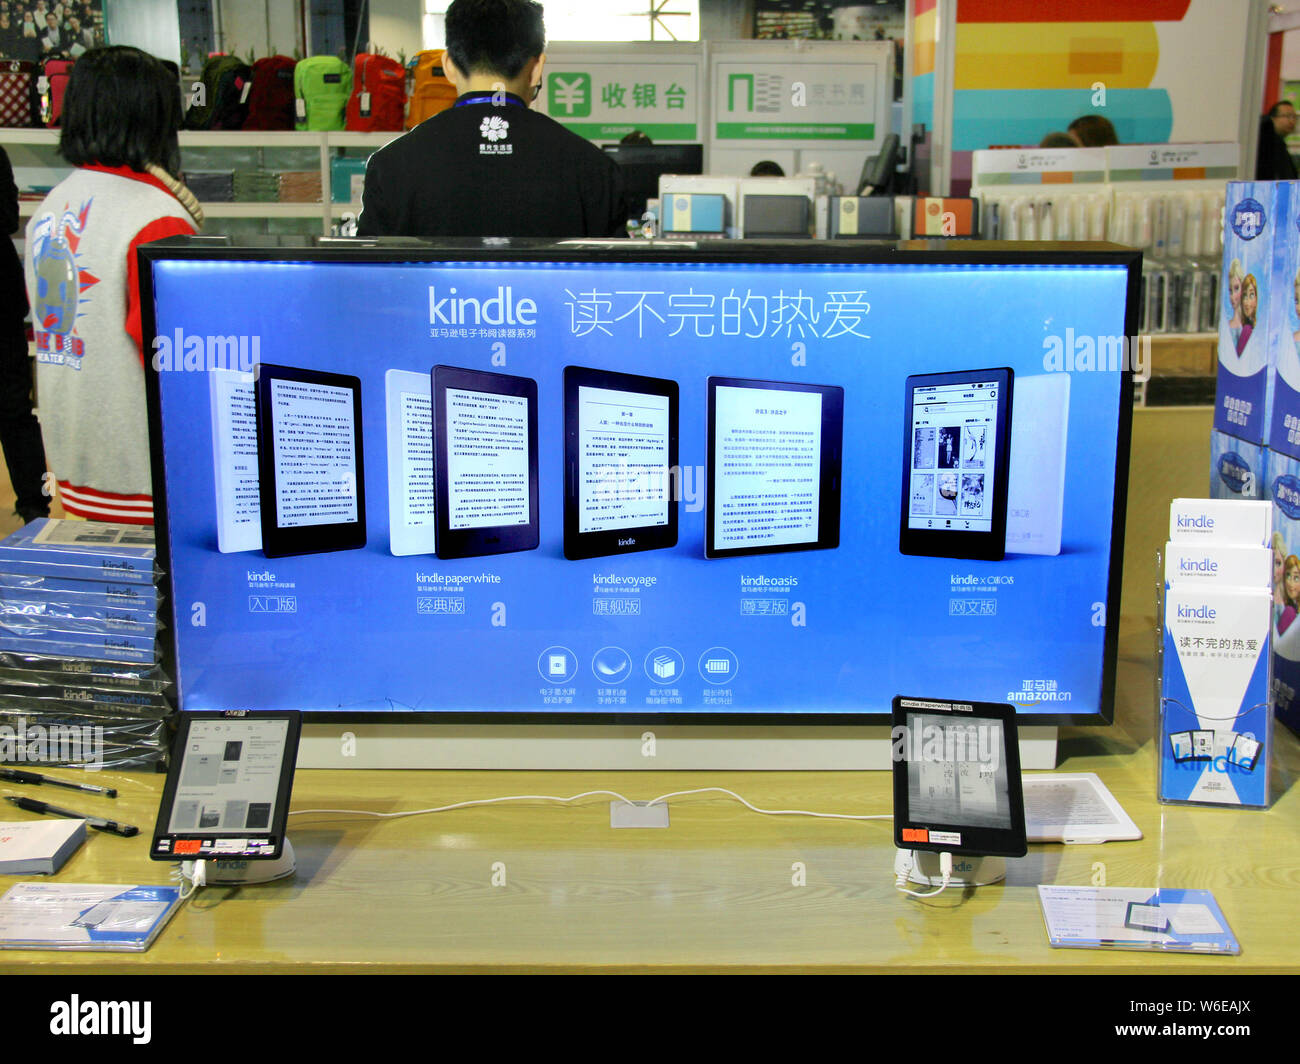 Kindle tablets of American e-commerce giant Amazon are on display during the 2018 Nanjing Book Fair in Nanjing city, east China's Jiangsu province, 22 Stock Photo